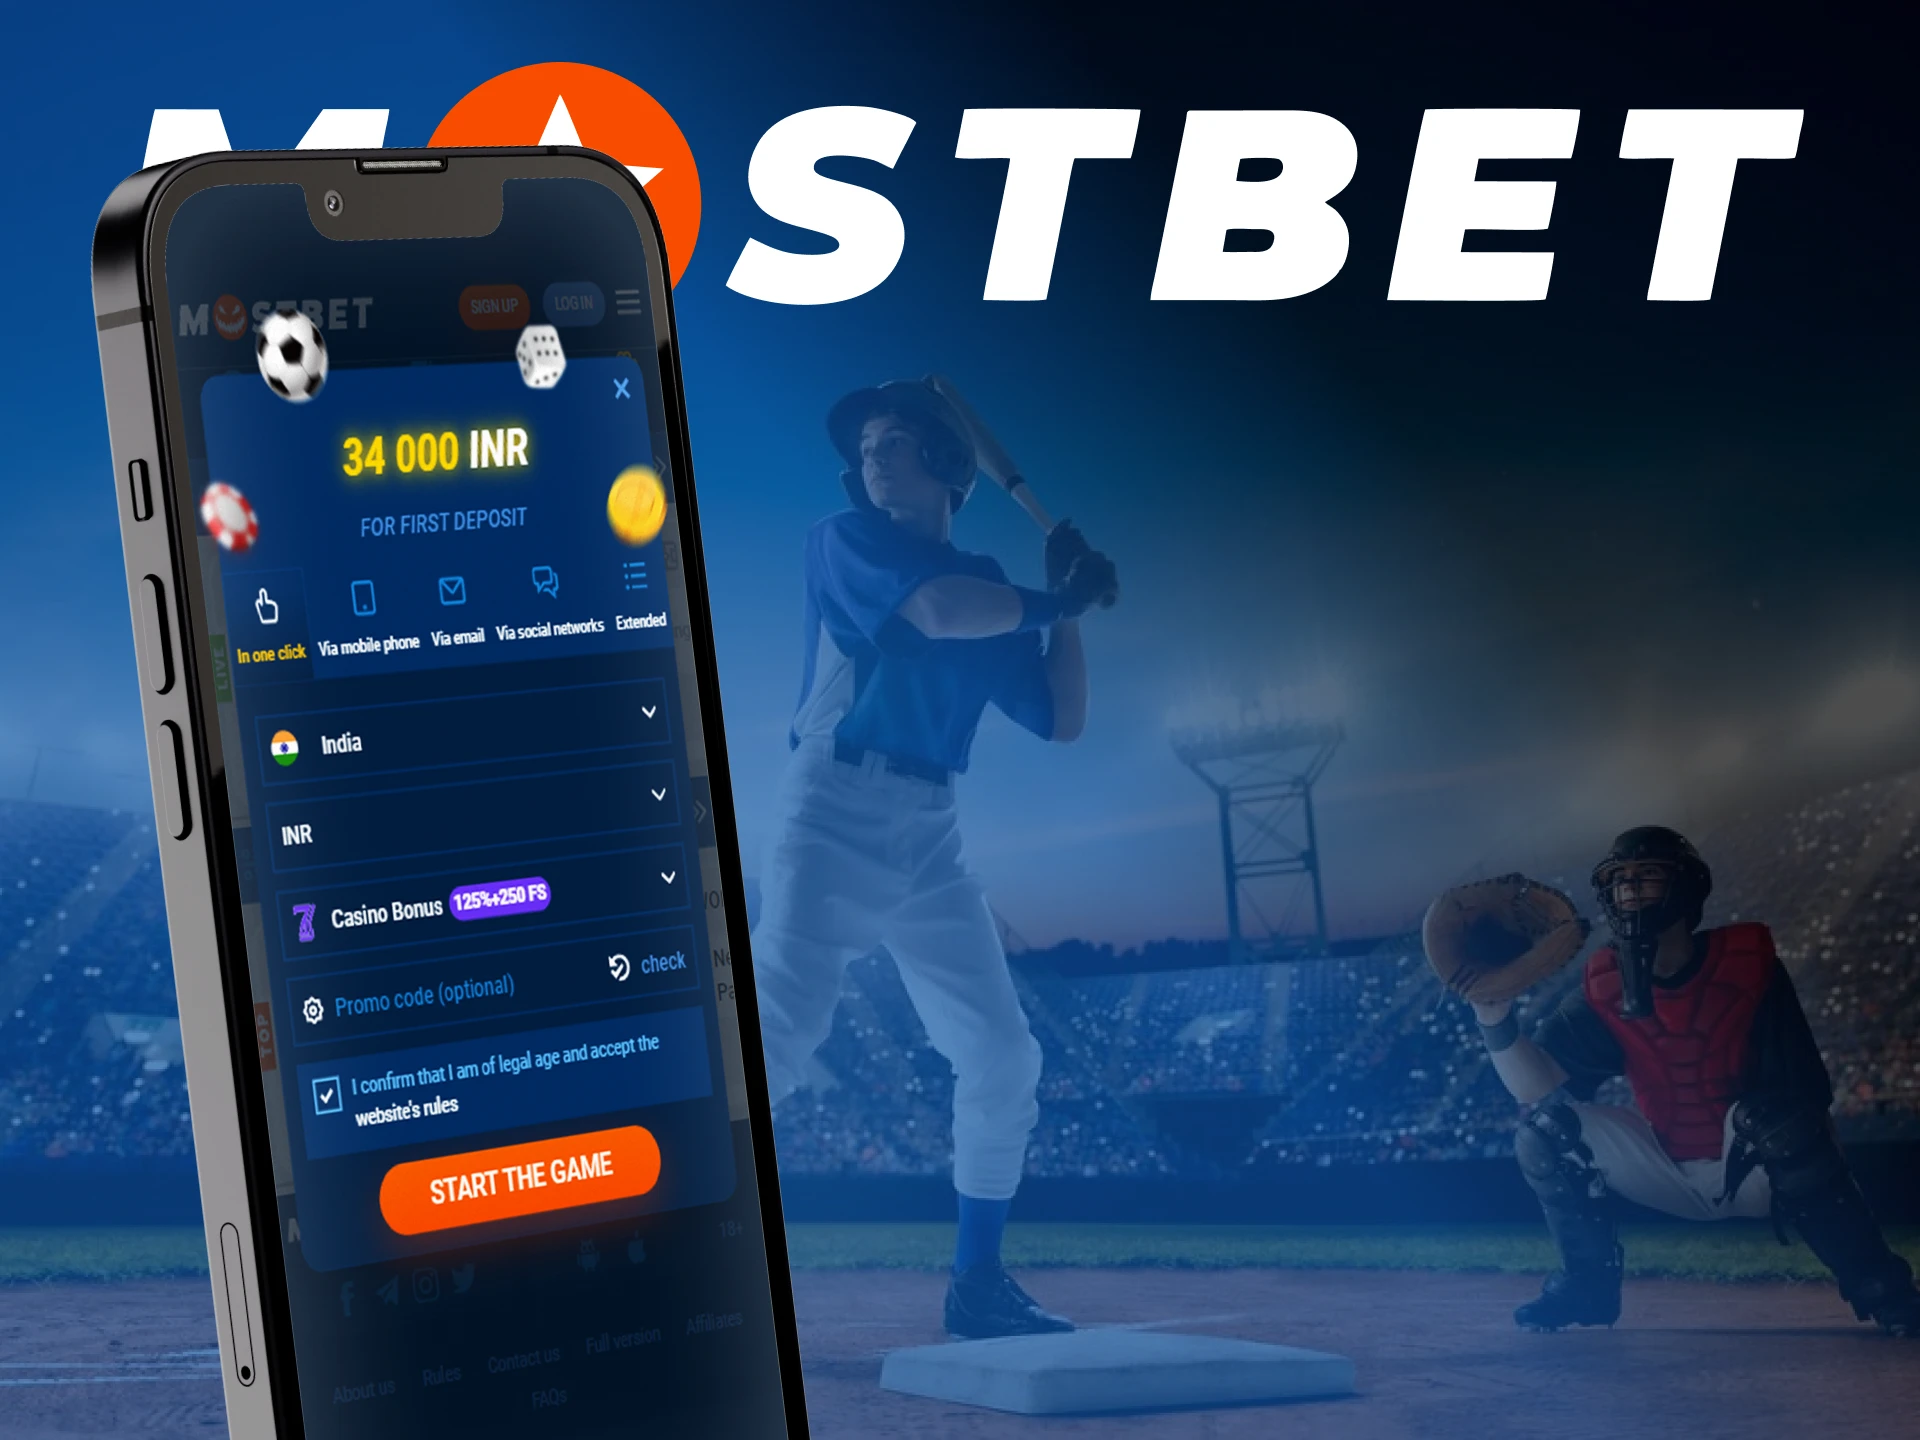 Run the app and create a new account on Mostbet.